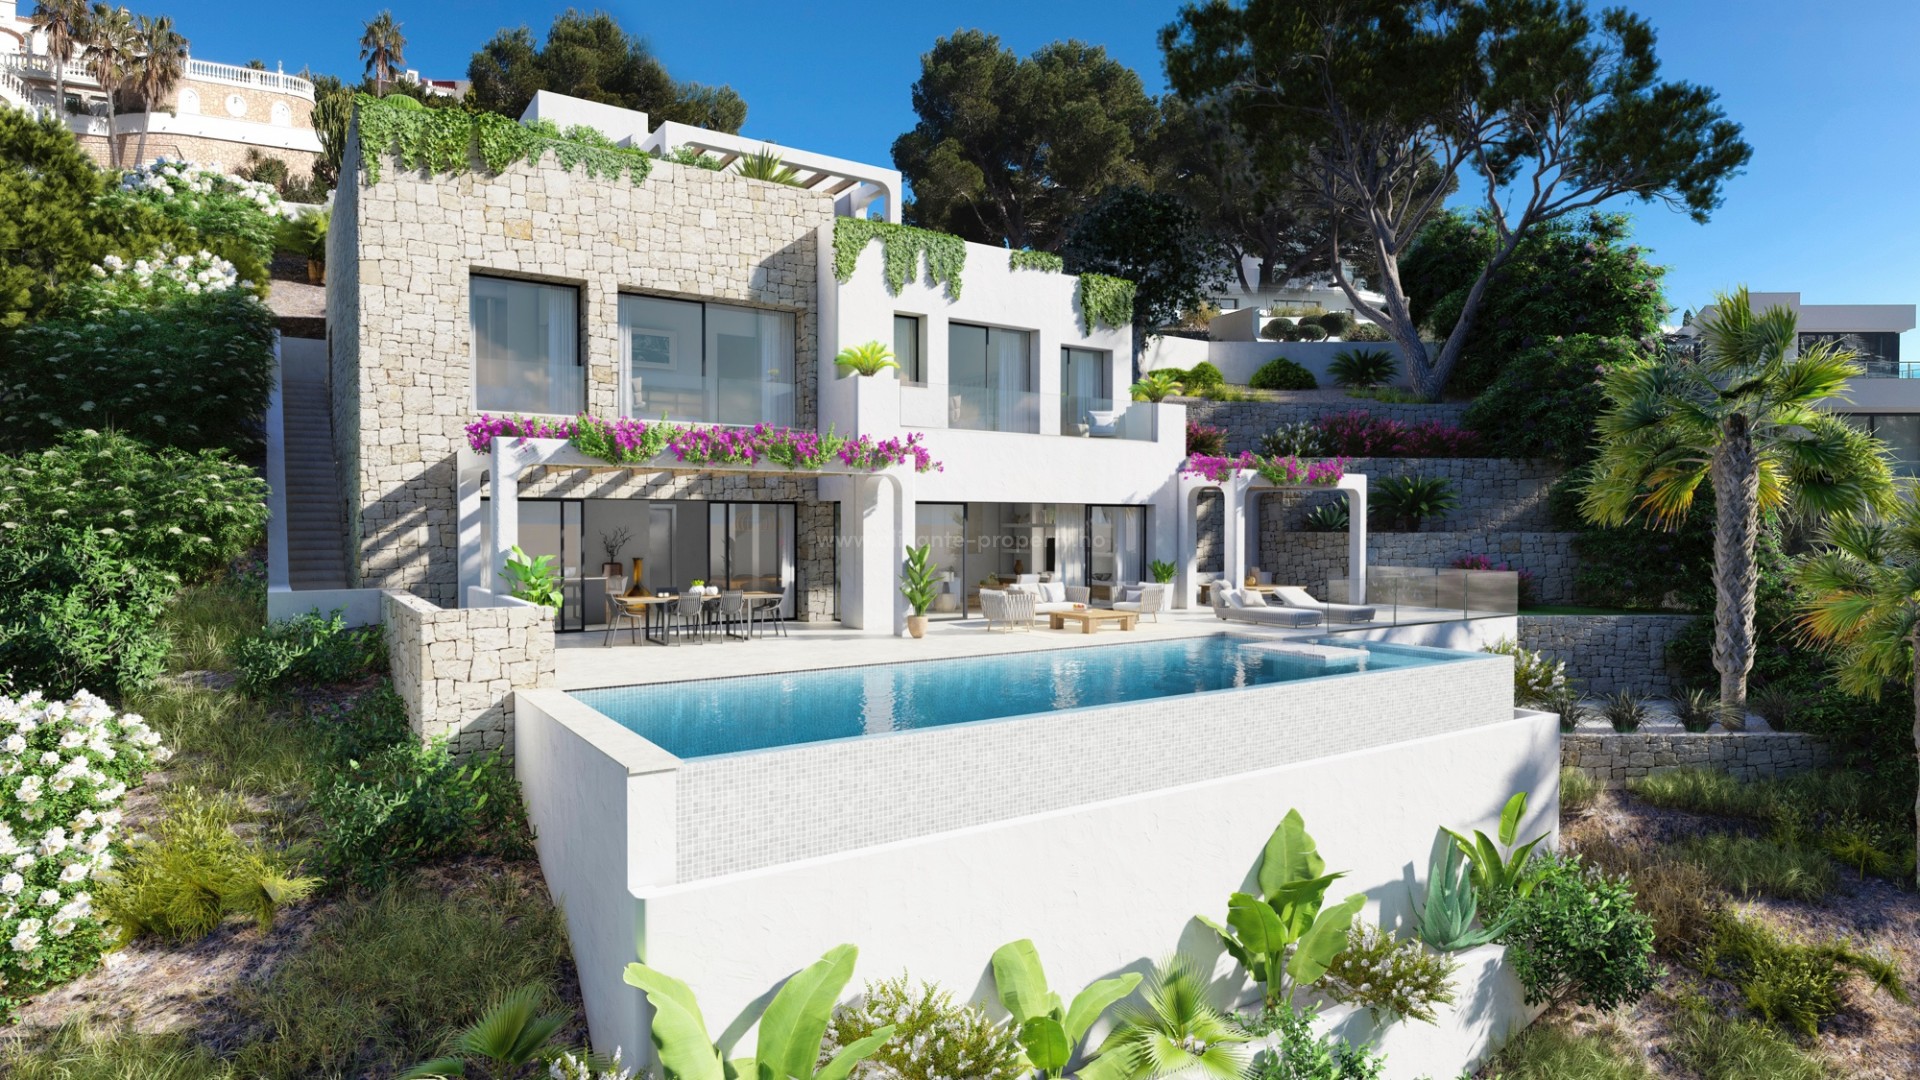 Modern luxury villa with incredible views in Altea Hills with 4 bedrooms and 4 bathrooms, infinity pool and several terraces. Parking for several cars